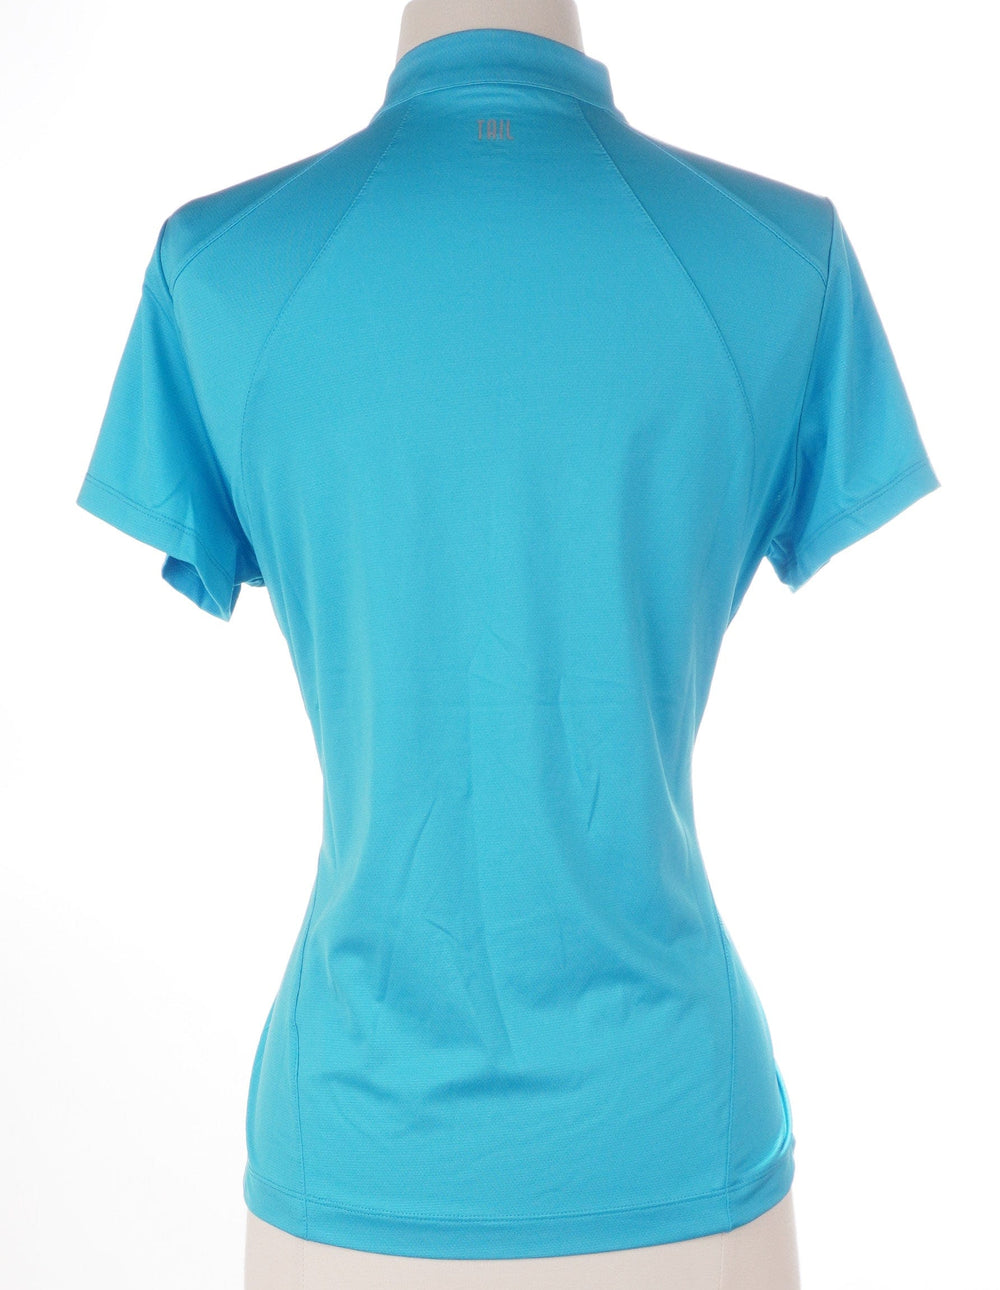 Tail Blue / Small Tail Short Sleeve Top - Blue Atoll - Size Small